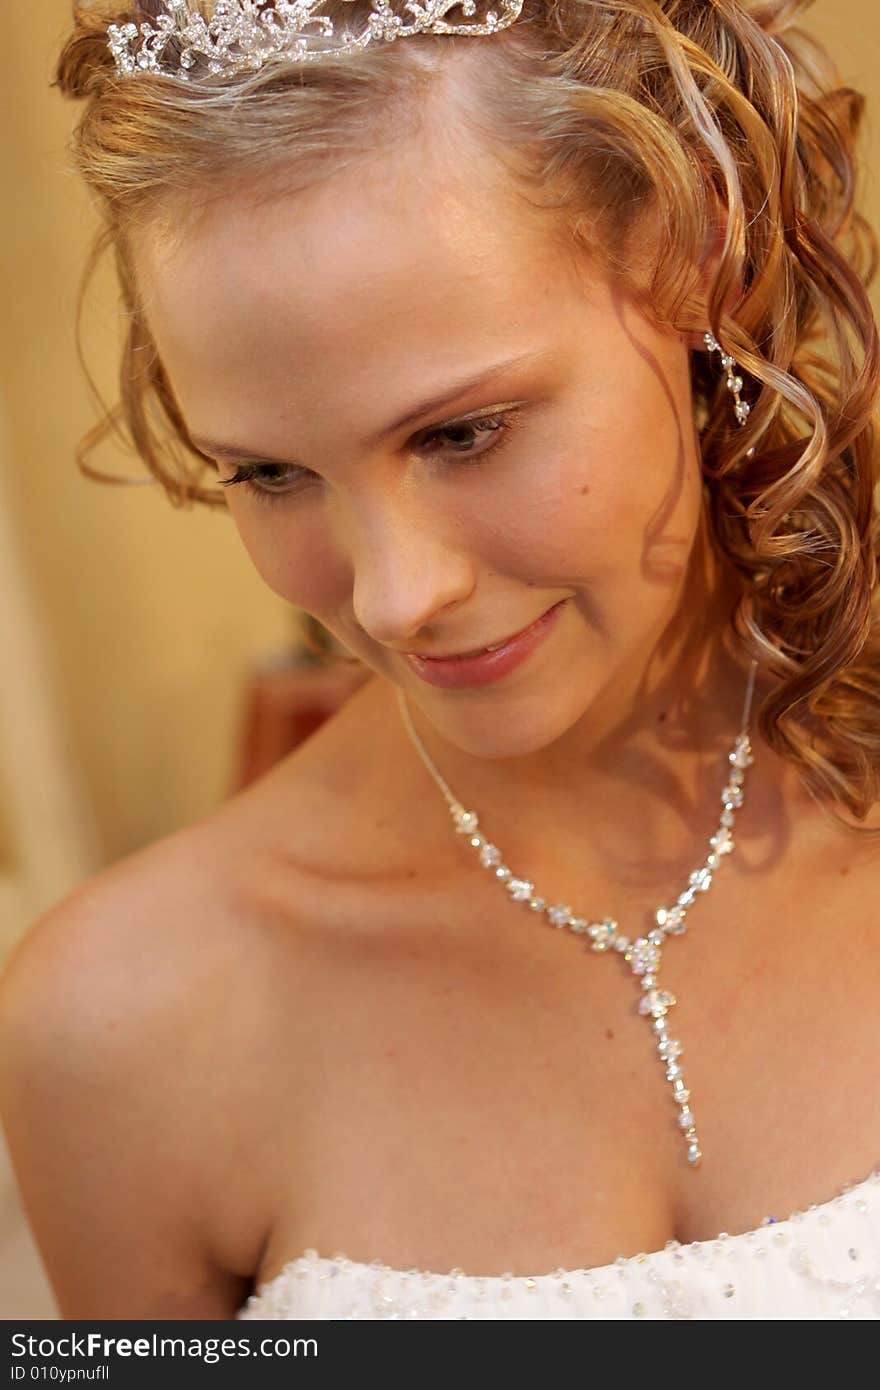 A bride on her wedding day